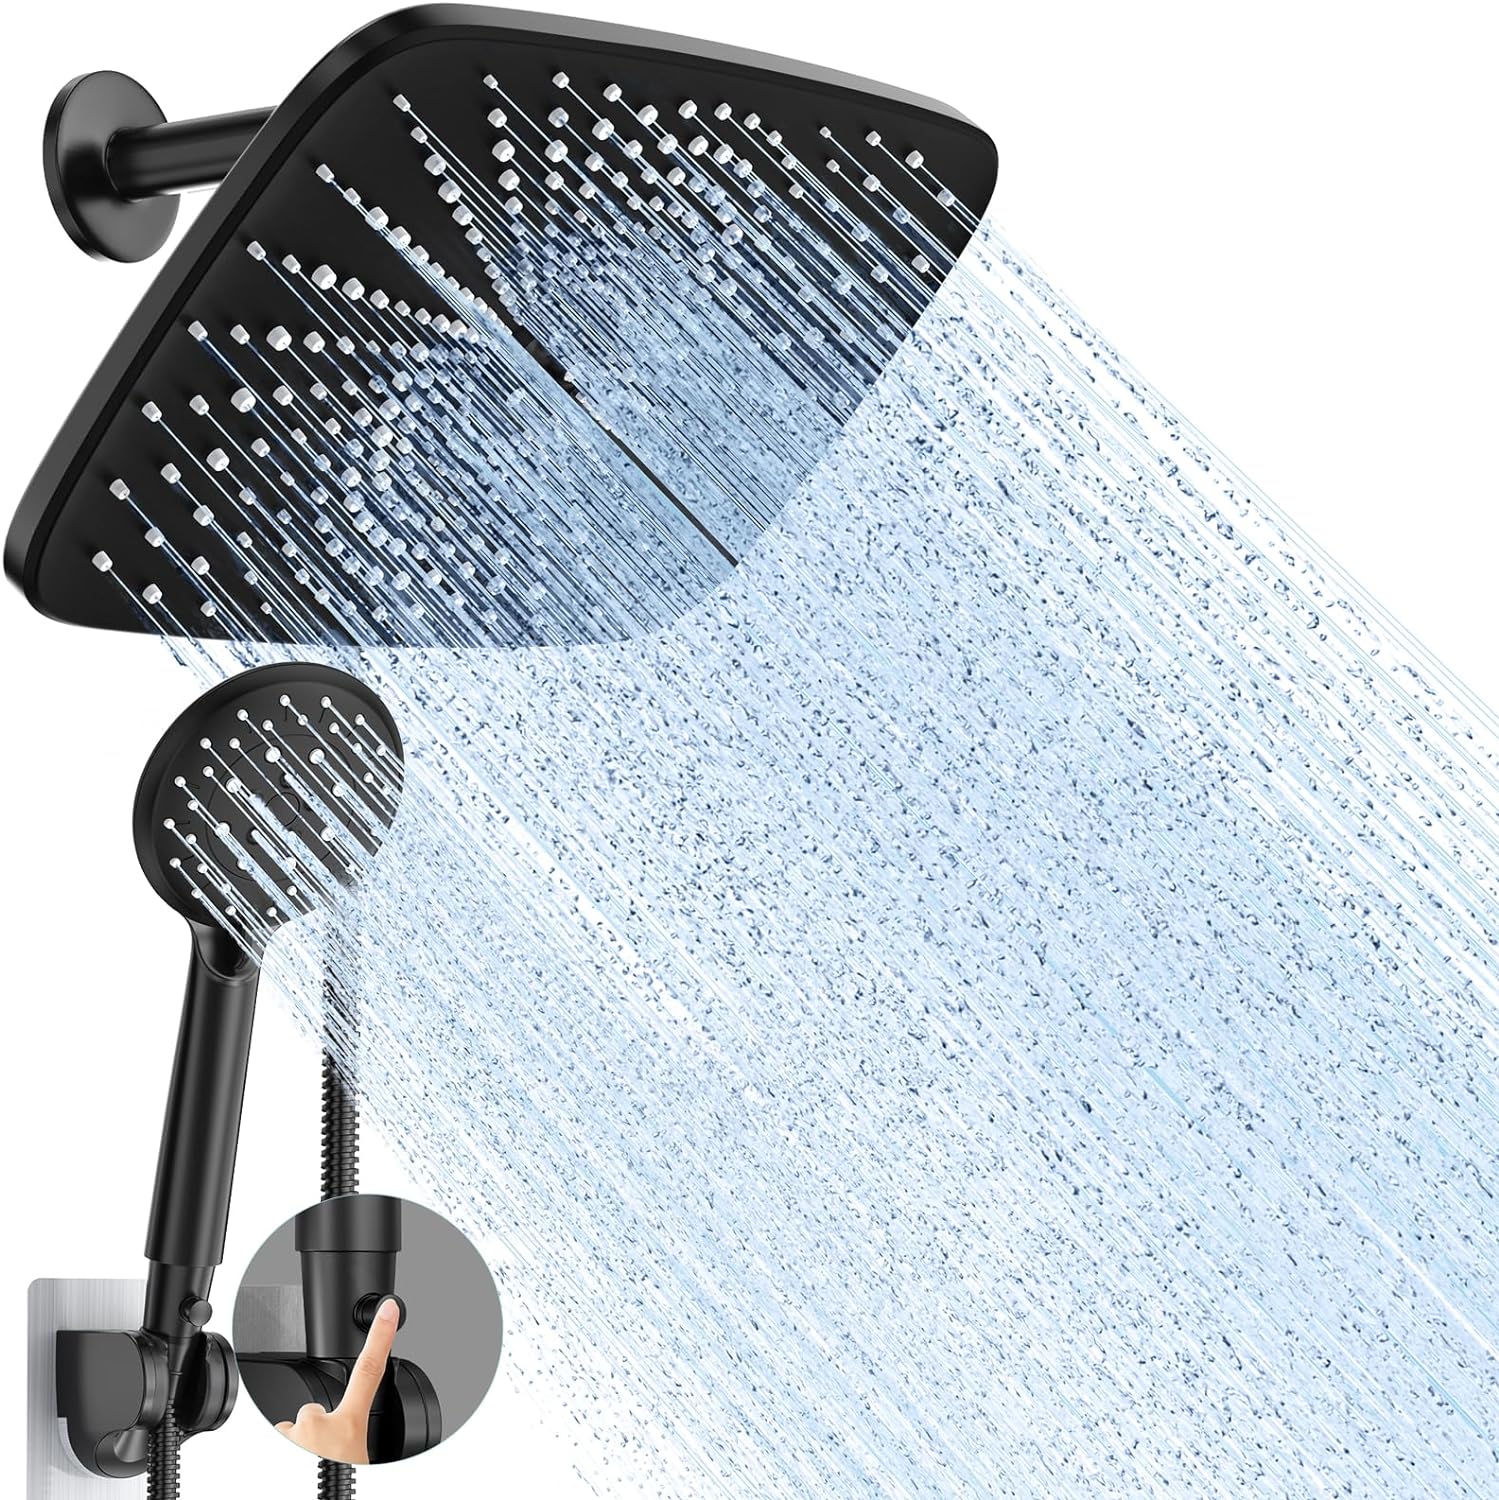 I recently upgraded my shower experience with the Veken 12 Inch High Pressure Rain Shower Head, and I must say, it has been a game-changer! Here' why I'm absolutely thrilled with this purchase:1. Impressive Water Pressure:The high-pressure performance of this shower head is truly remarkable. It delivers a strong and invigorating rainfall experience that feels luxurious and revitalizing. Say goodbye to lackluster showers C the Veken shower head ensures you get the perfect water pressure every ti